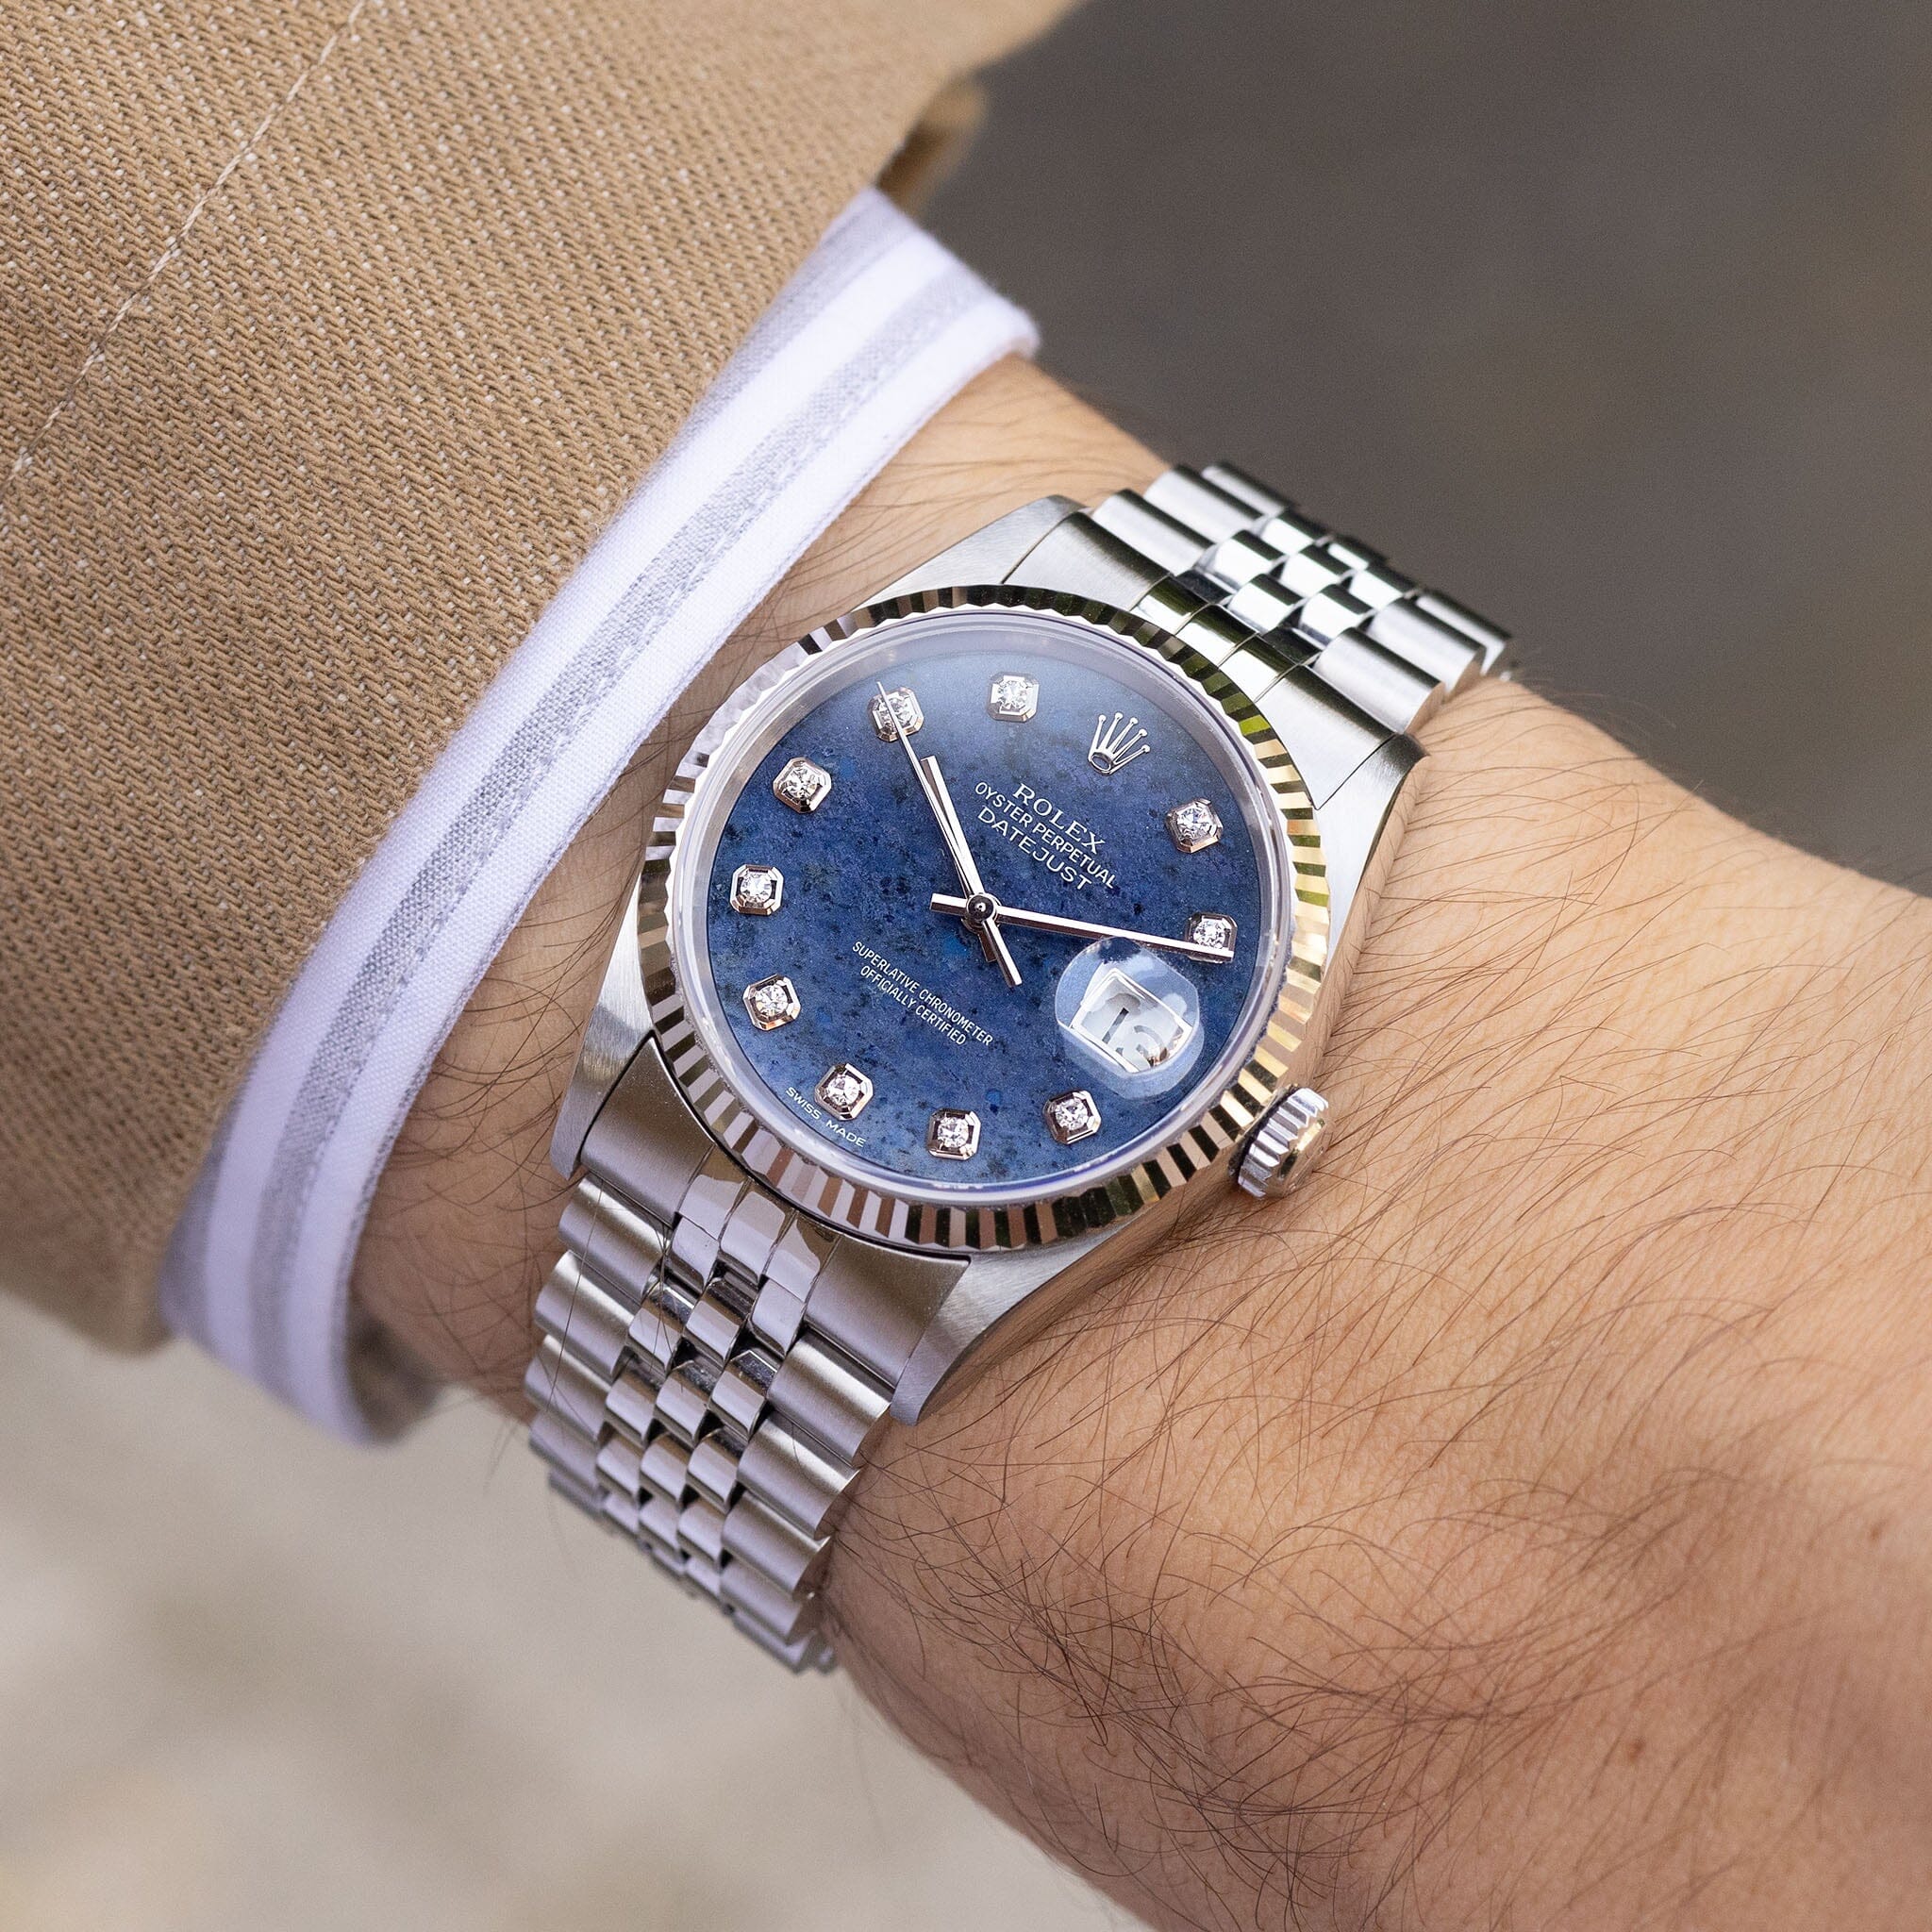 Rolex Datejust Sodalite Dial Ref 16234 Box and Papers set